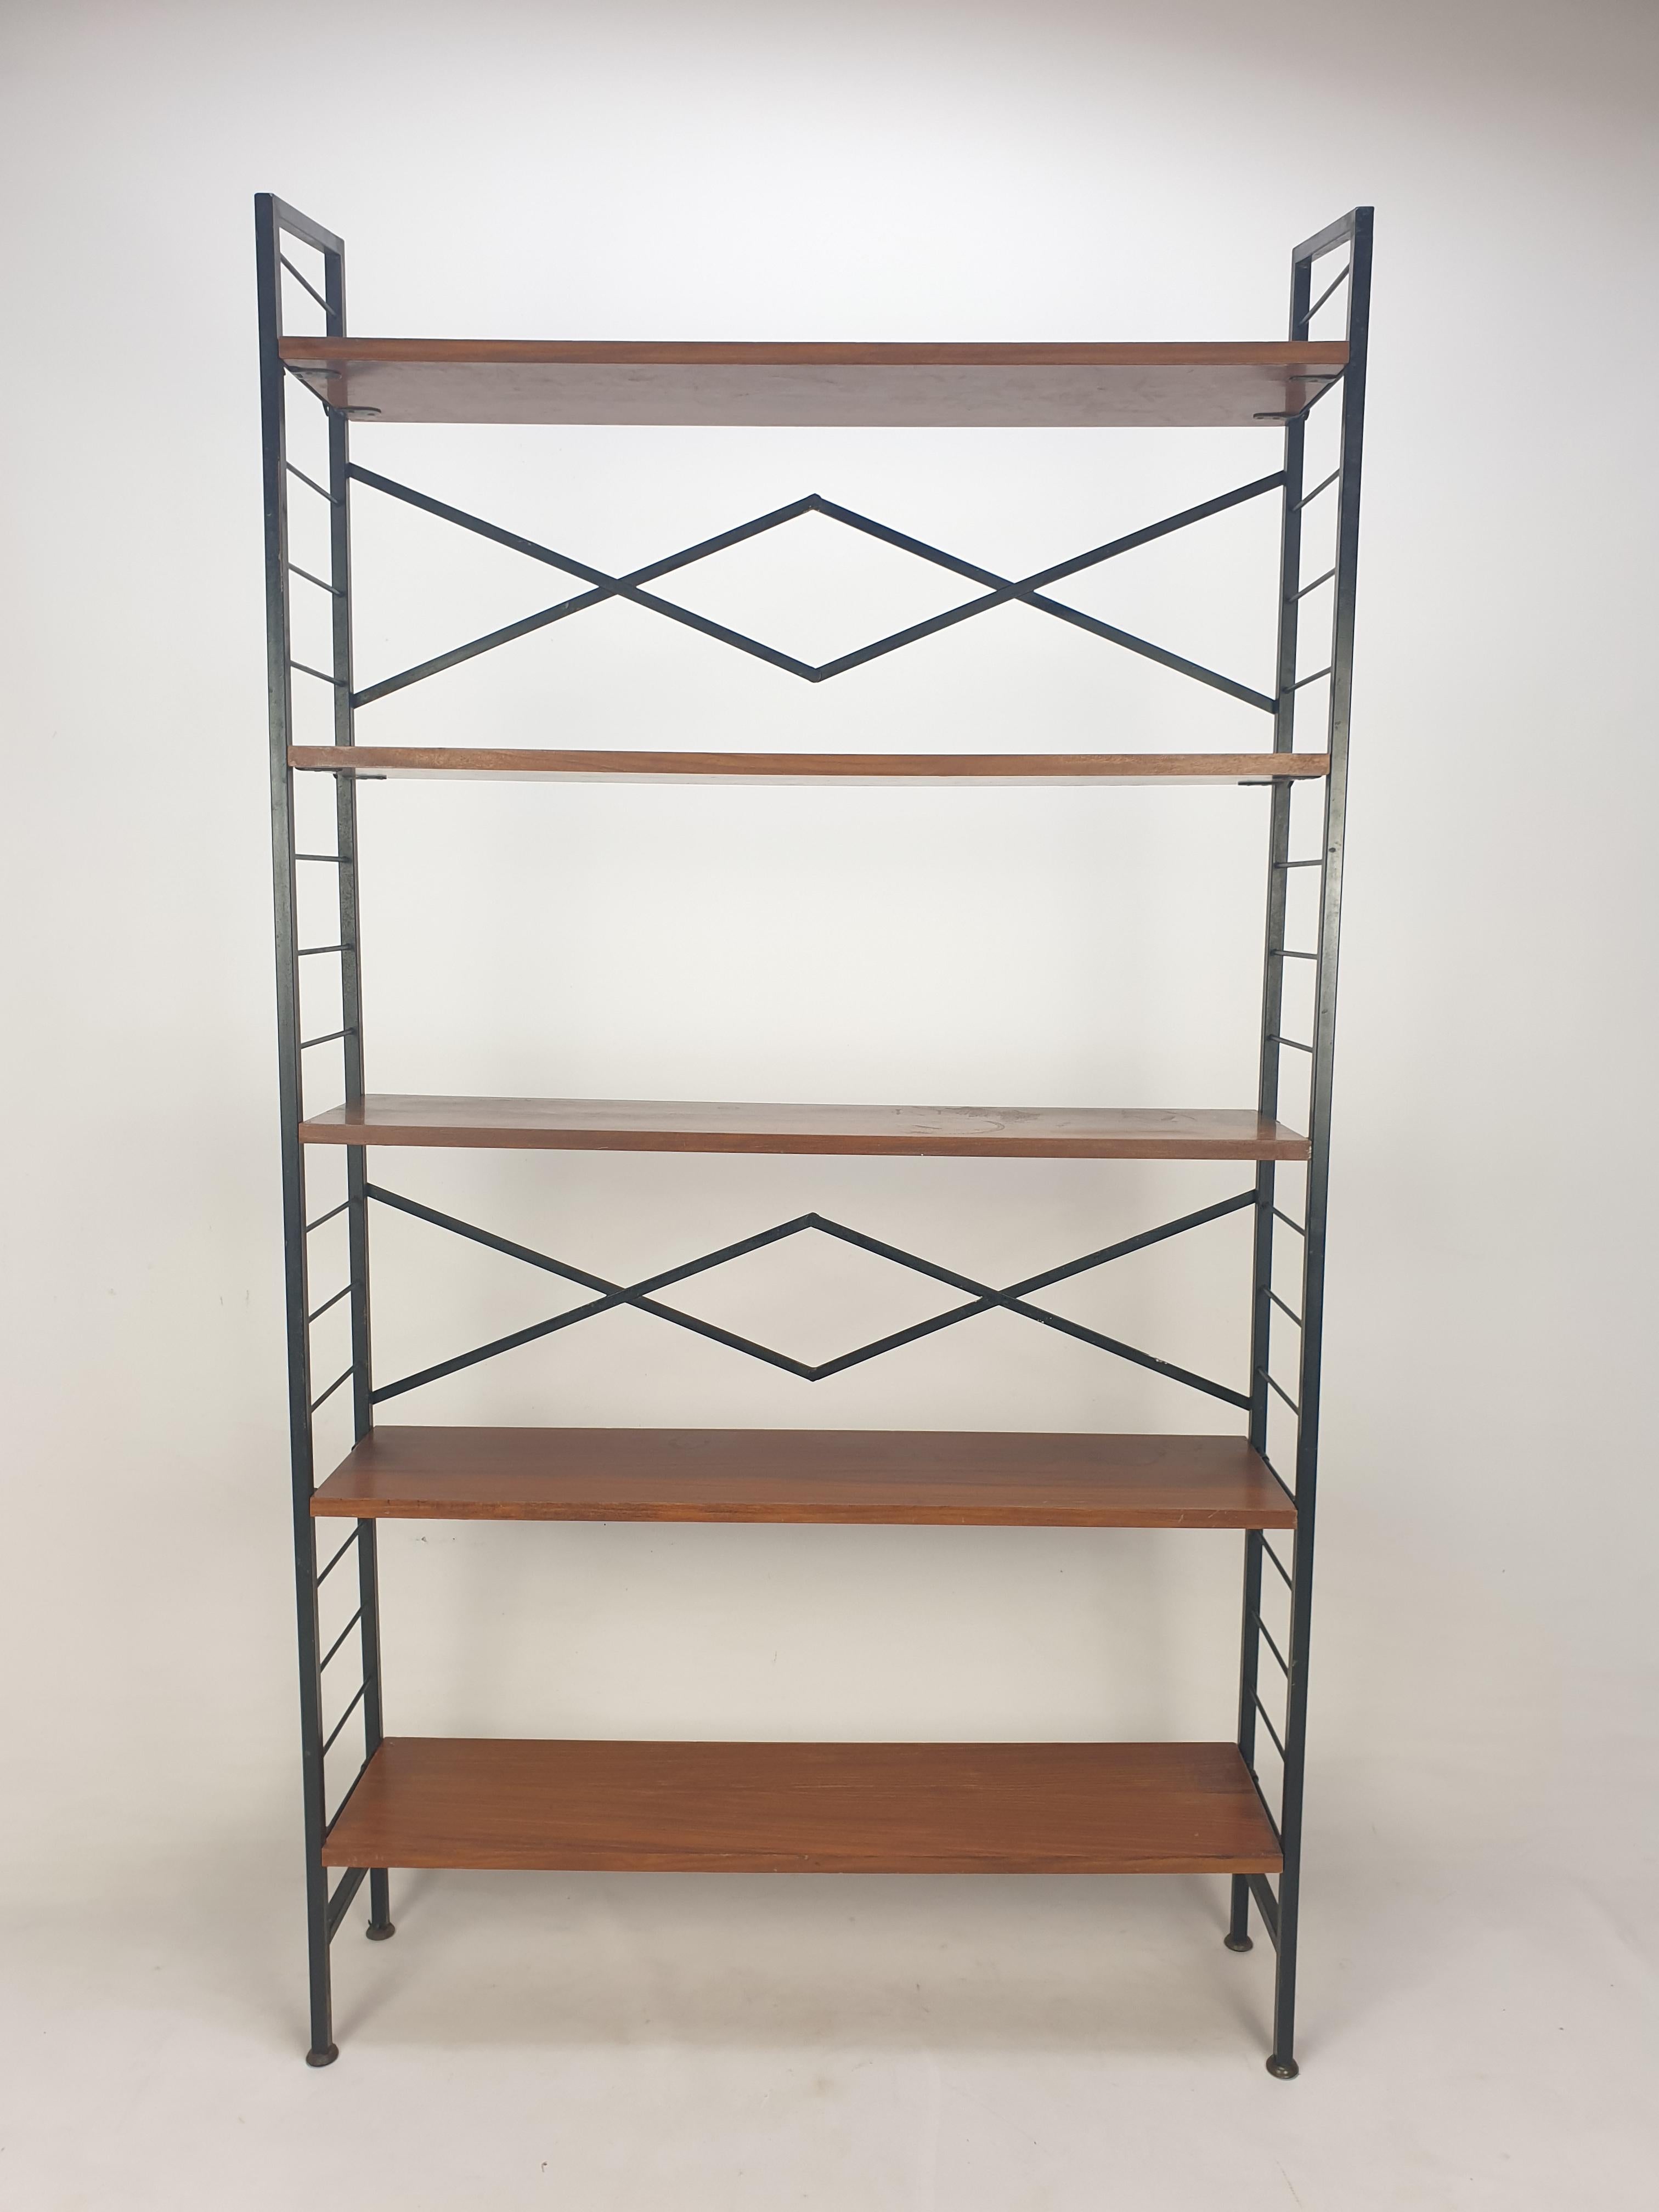 Very nice free standing shelve system, fabricated in Italy in the 50's.

5 wooden (teak veneer) shelves with a black painted metal system.

It is very easy to disassemble.